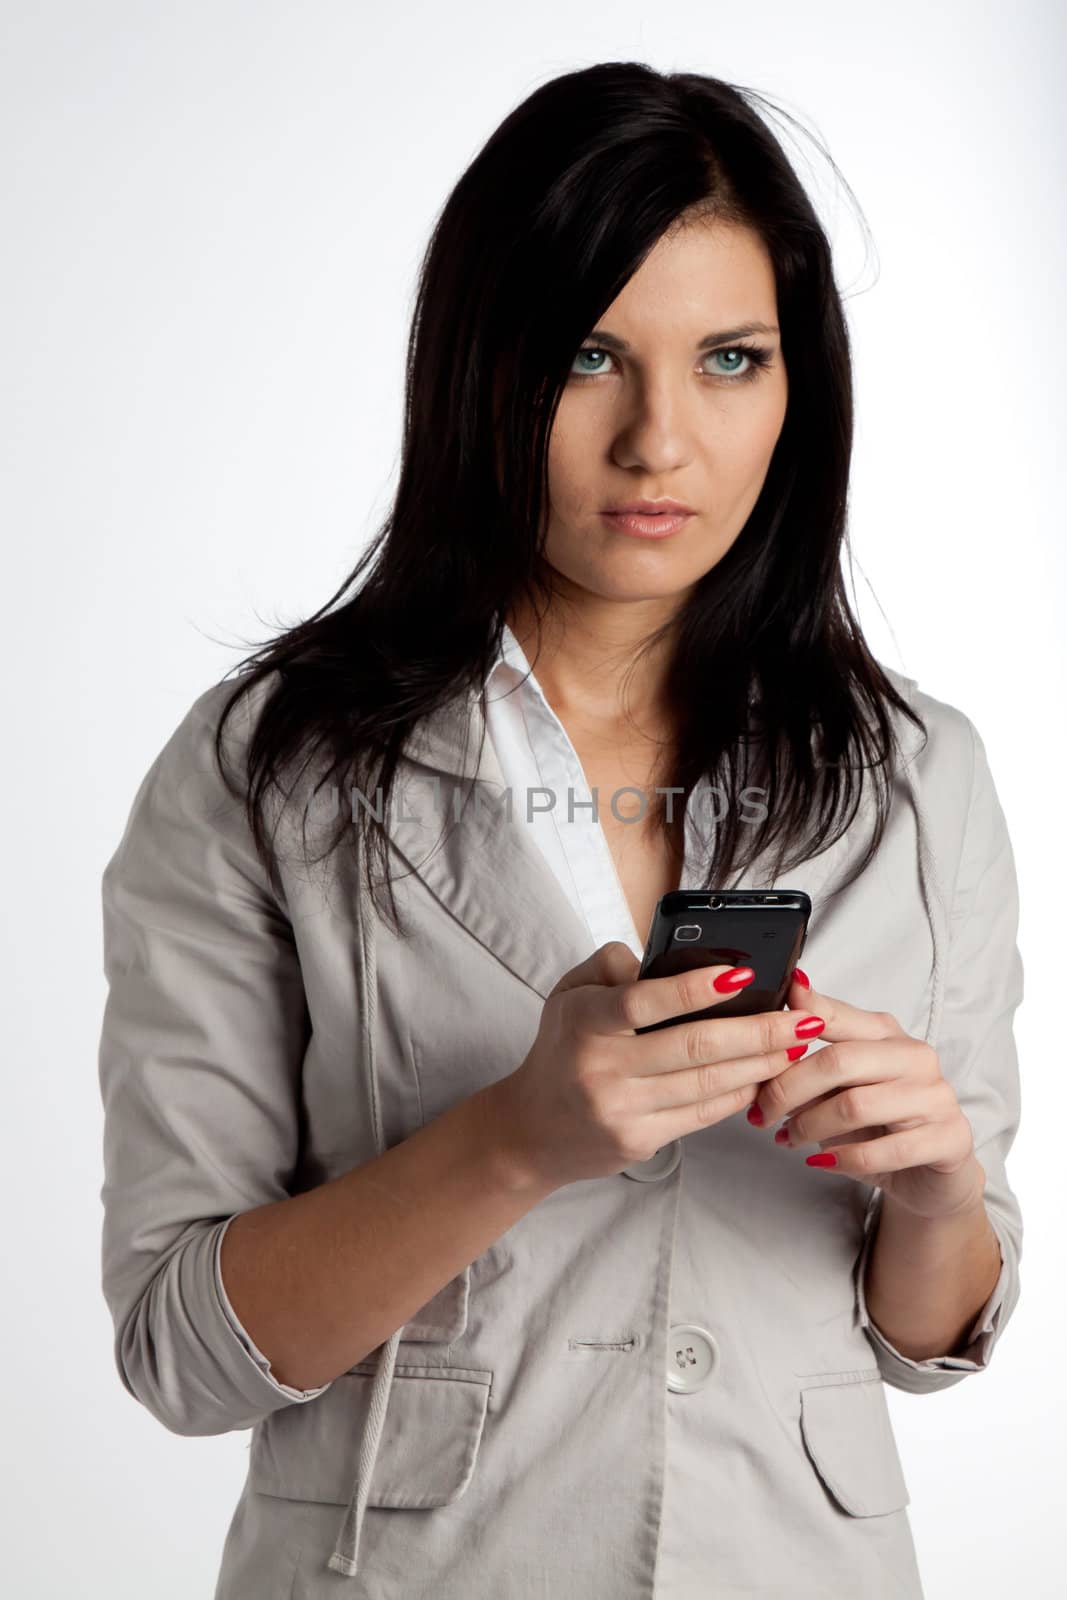 Image of young pretty people receiving SMS on your mobile phone